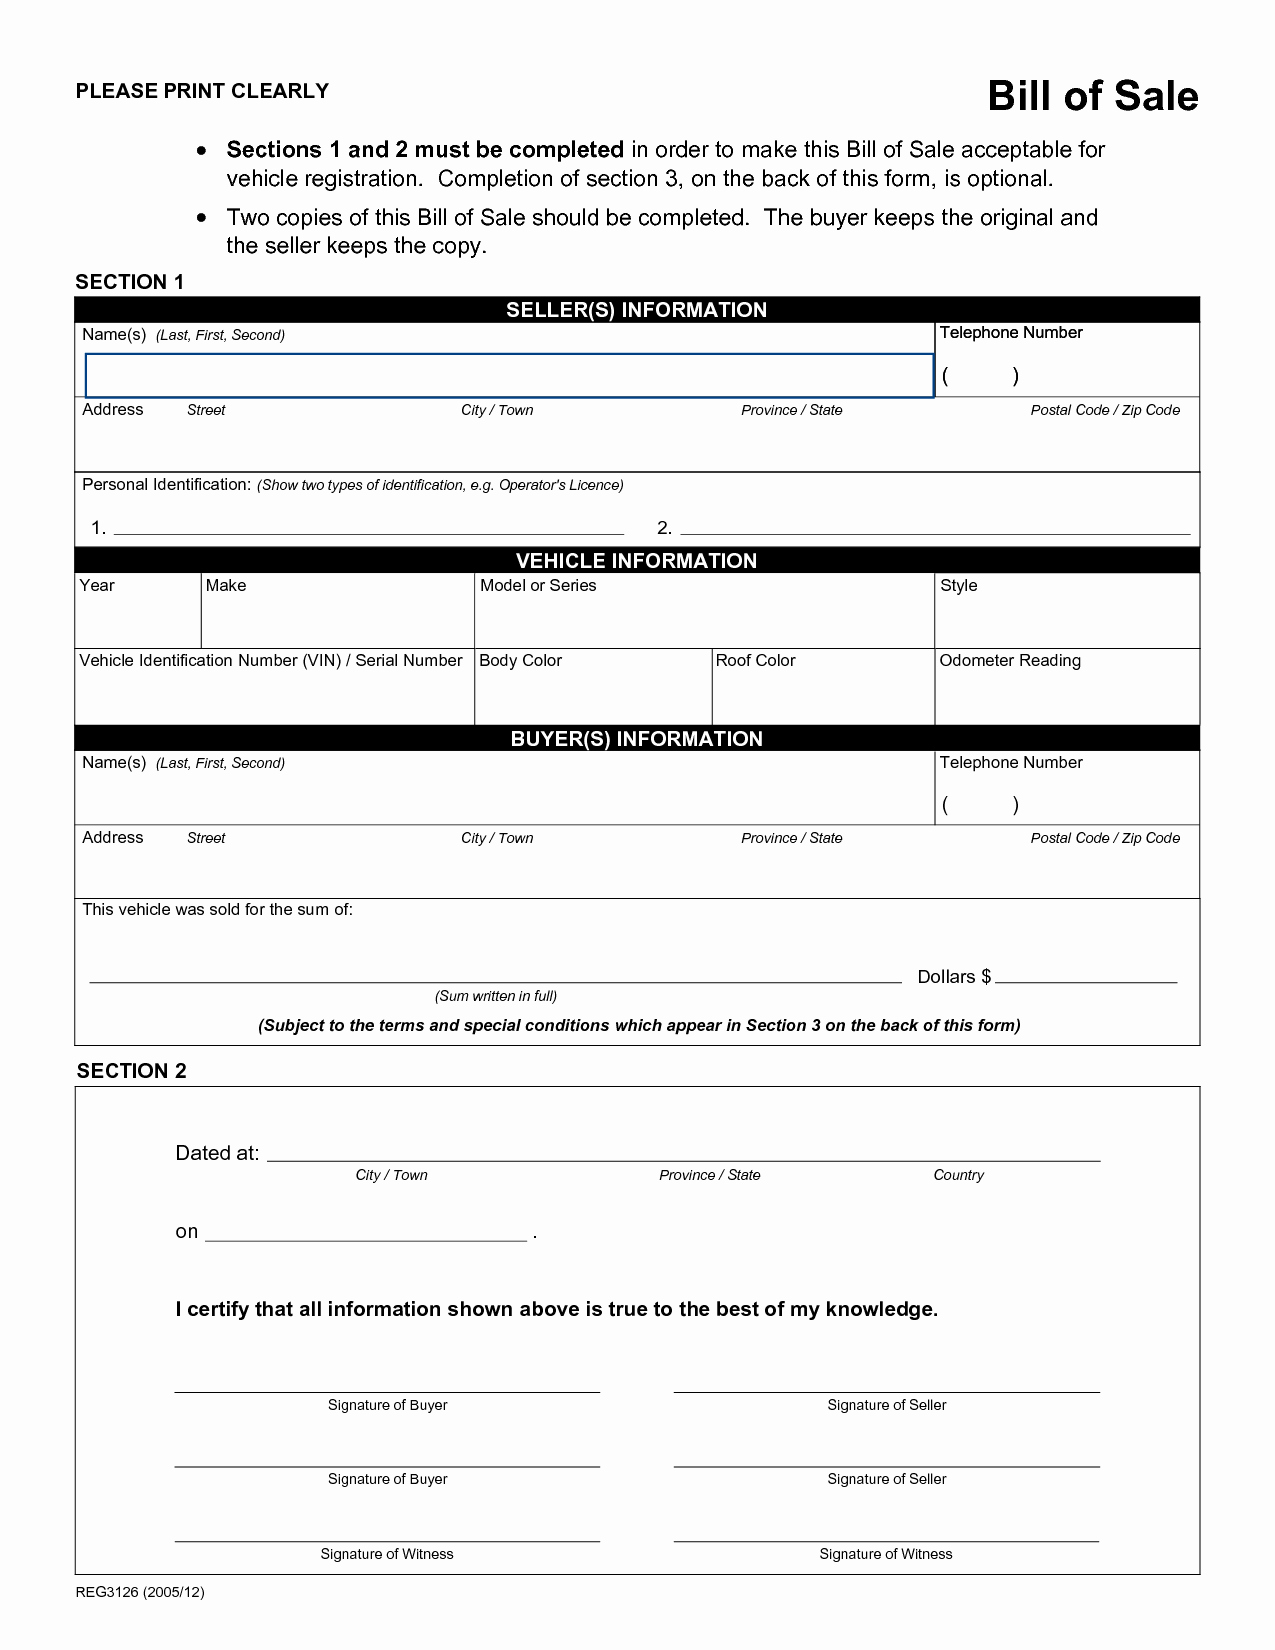 Horse Trailer Bill Of Sale Awesome Free Printable Rv Bill Of Sale form form Generic